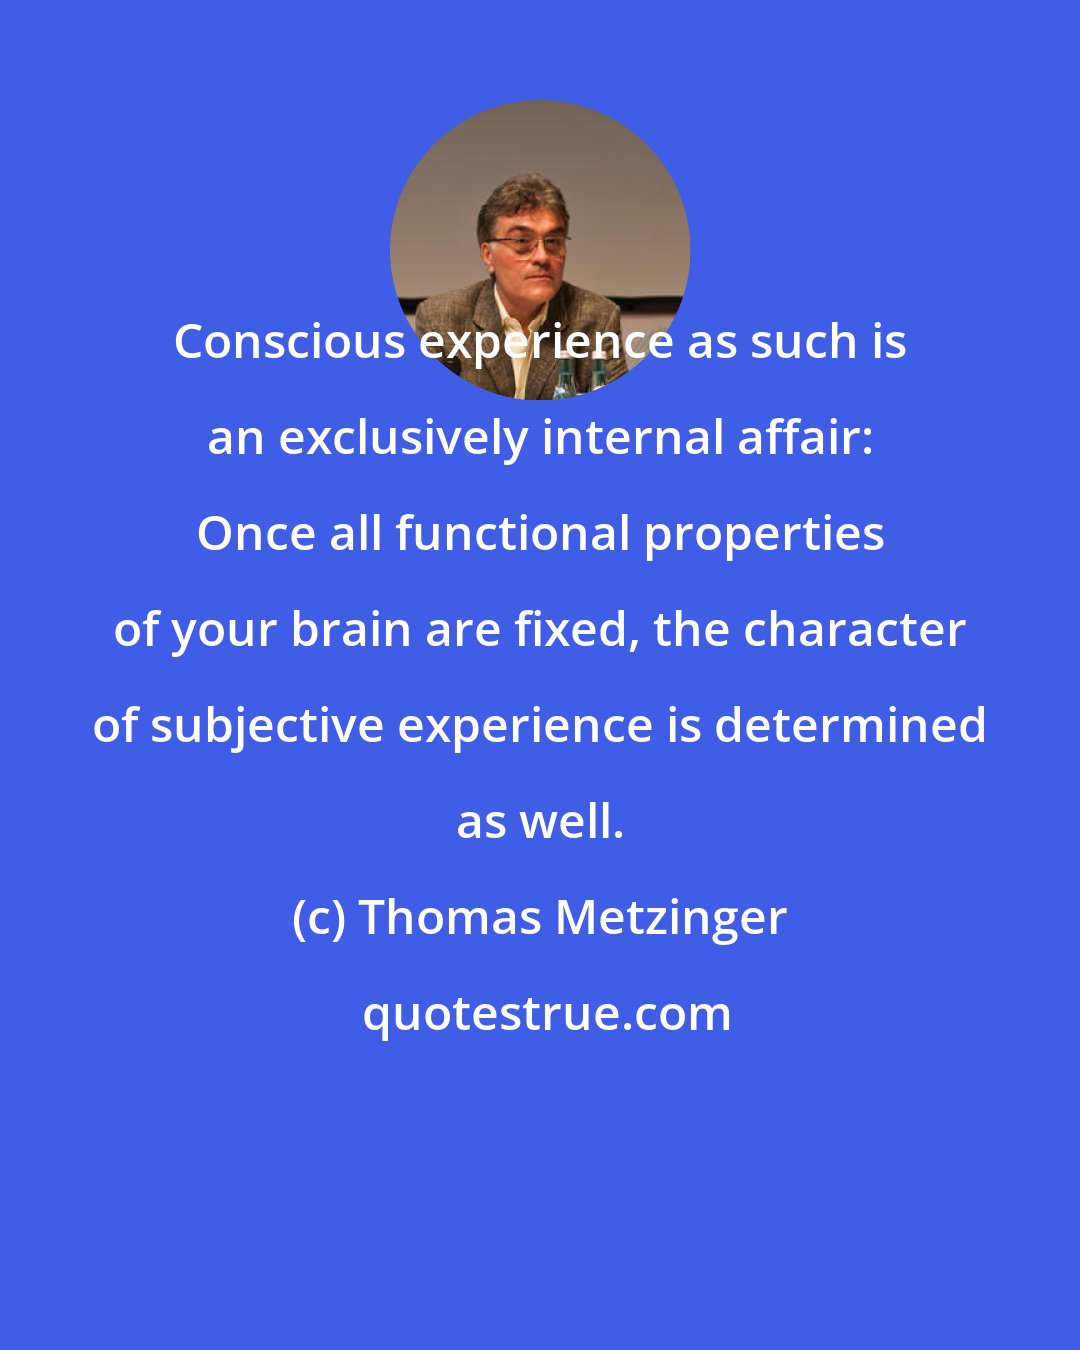 Thomas Metzinger: Conscious experience as such is an exclusively internal affair: Once all functional properties of your brain are fixed, the character of subjective experience is determined as well.